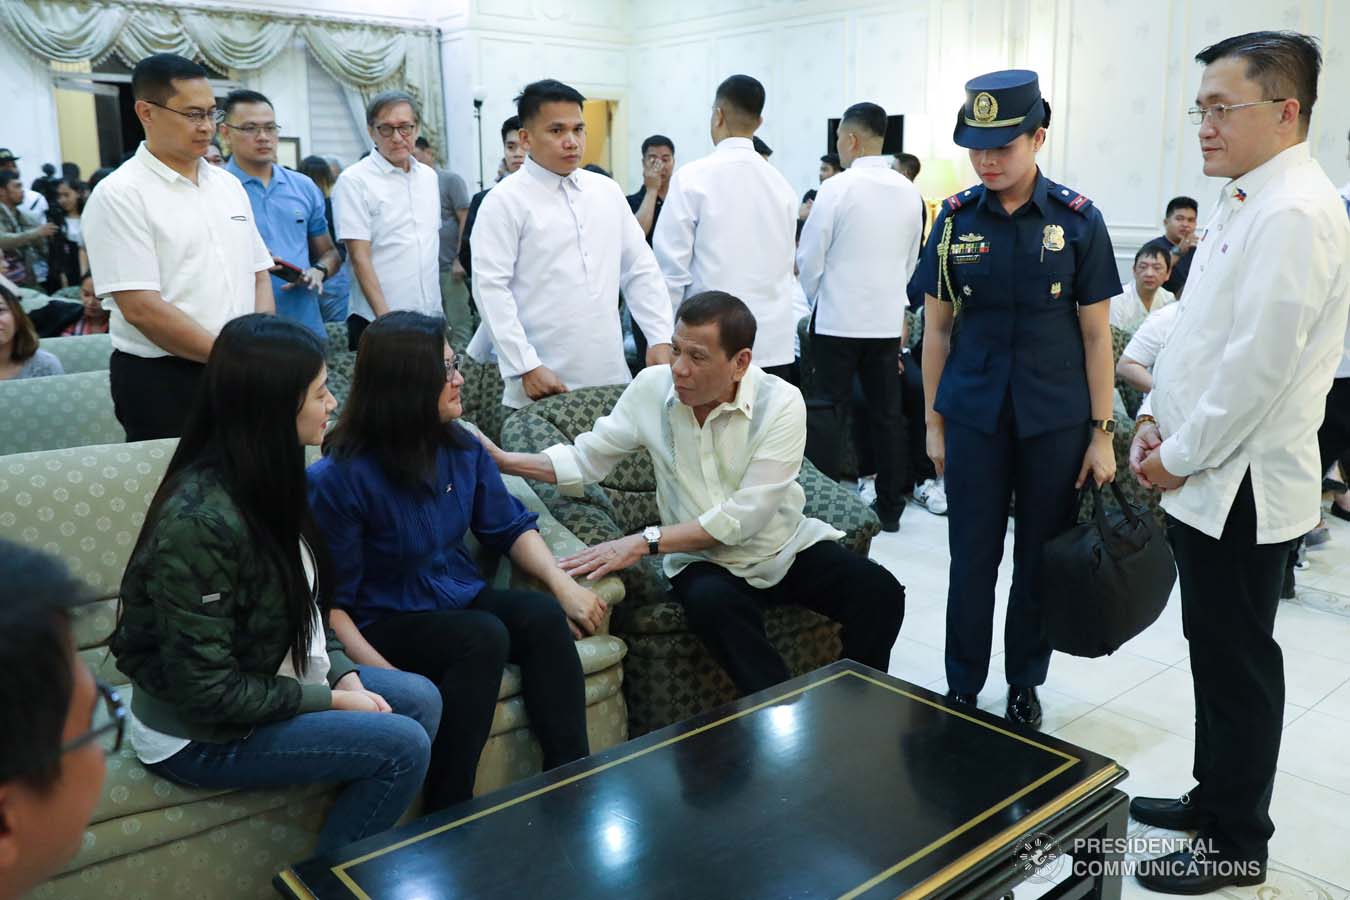 President Rodrigo Roa Duterte condoles with the family of the late Retired Police General Francisco Villaroman as he visited the wake at the Cosmopolitan Funeral Homes in Davao City on January 17, 2020. ROBINSON NIÑAL JR./PRESIDENTIAL PHOTO